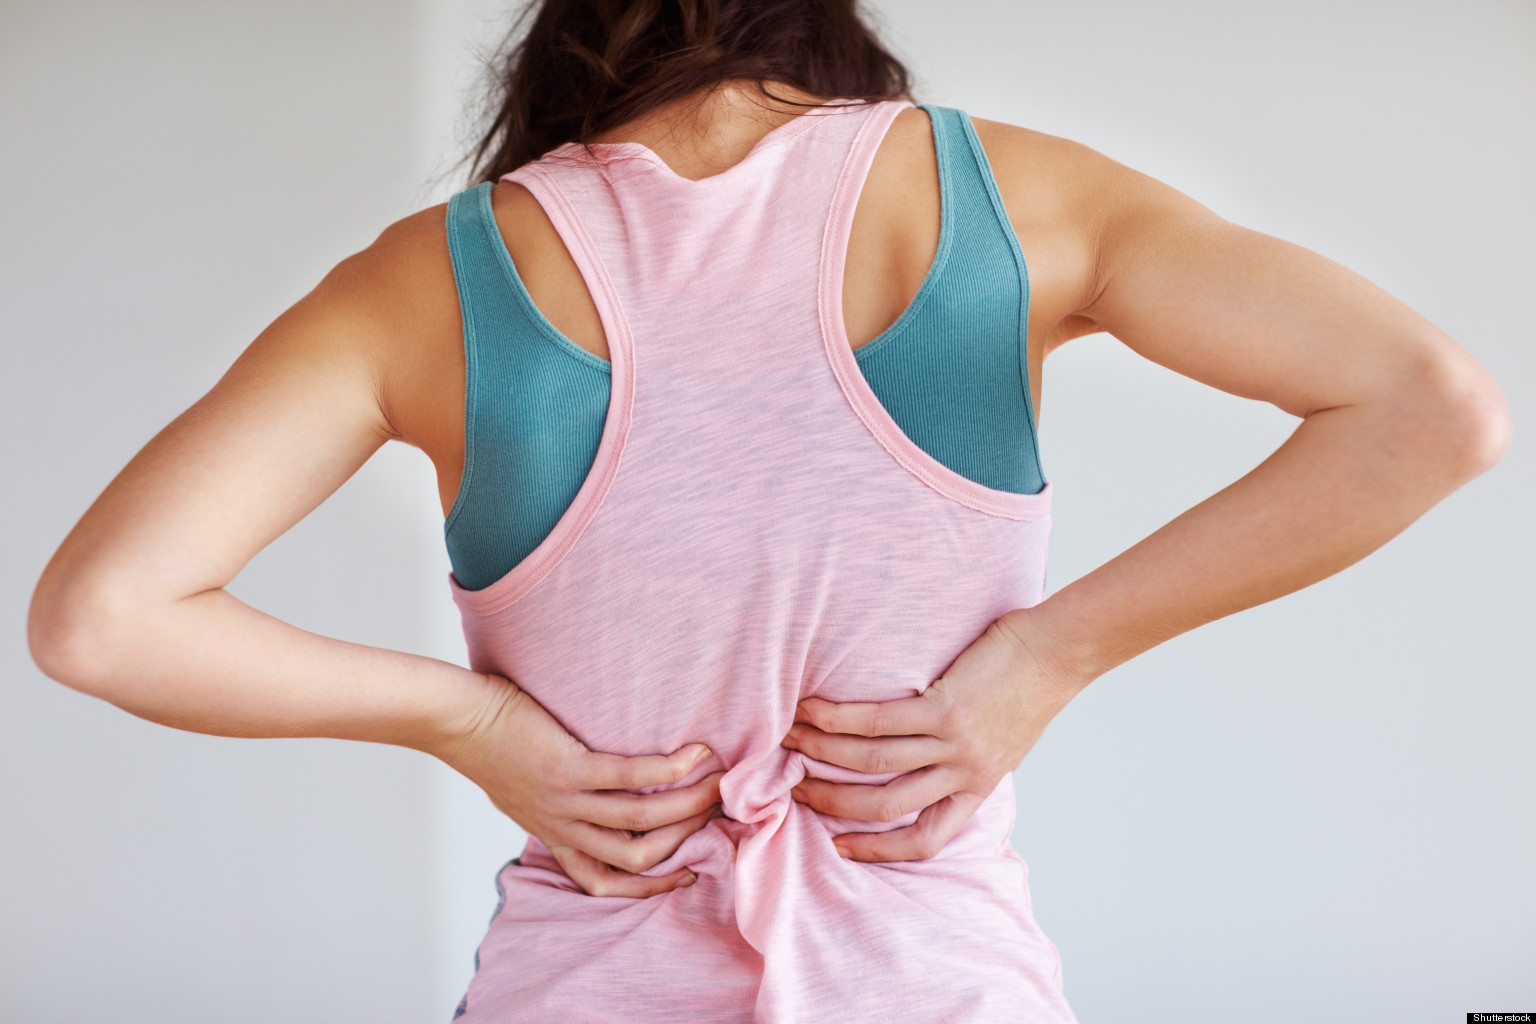 Backpain and movement for recovery